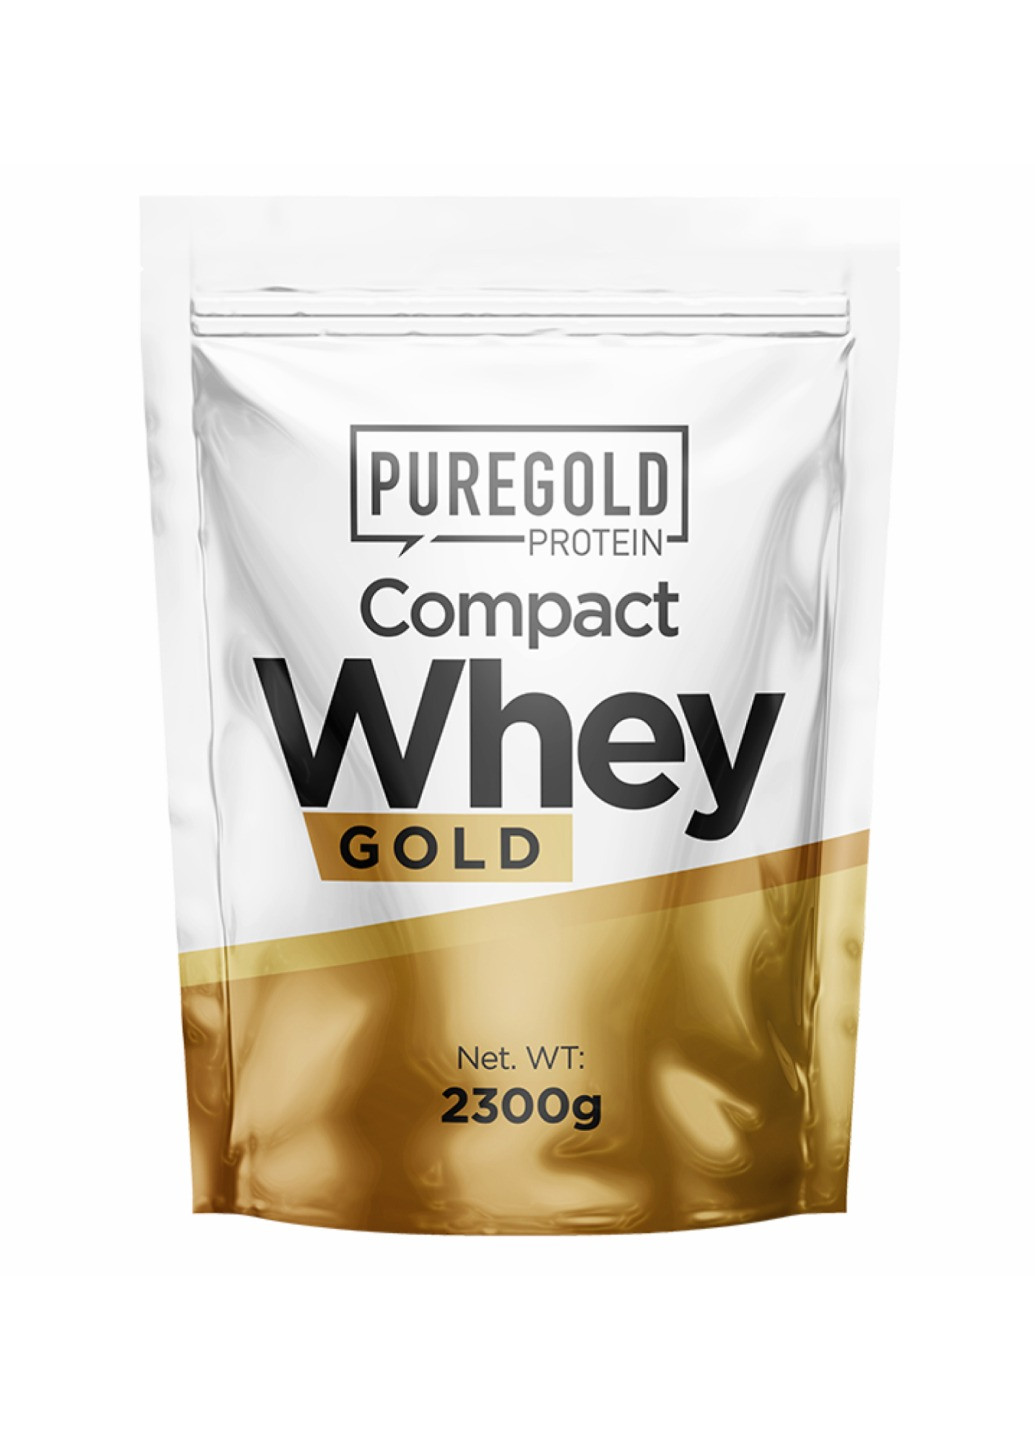 Протеин Compact Whey Gold - 2300g Peanut Butter Pure Gold Protein (270007906)